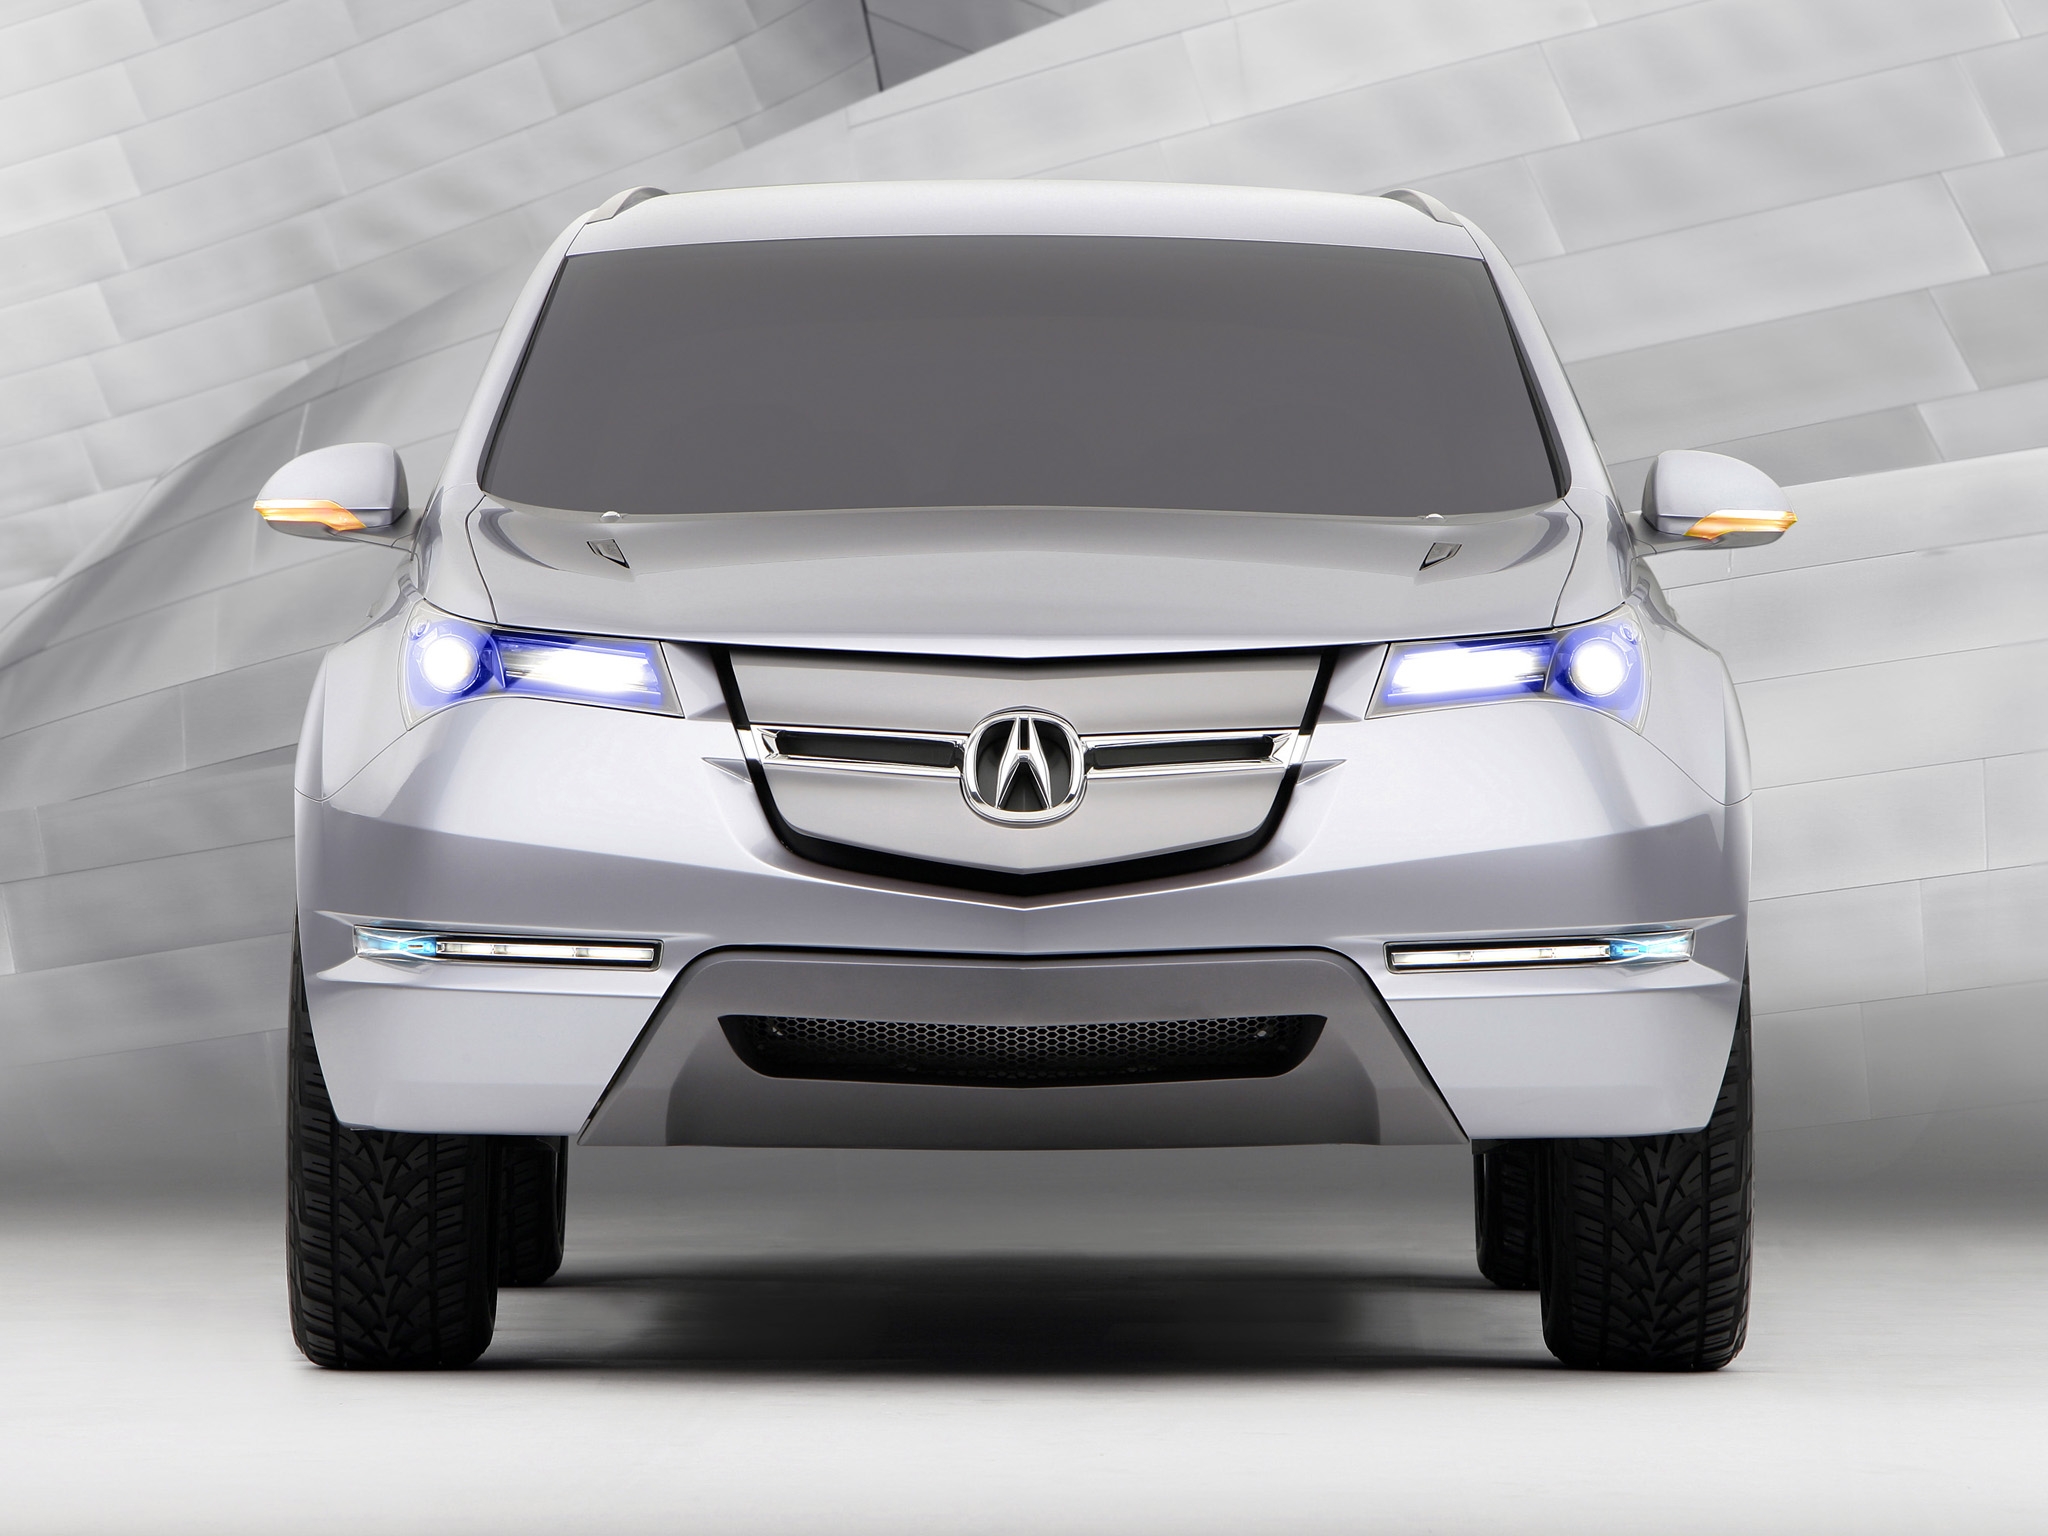 acura, concept car, front view, mdx home screen for smartphone